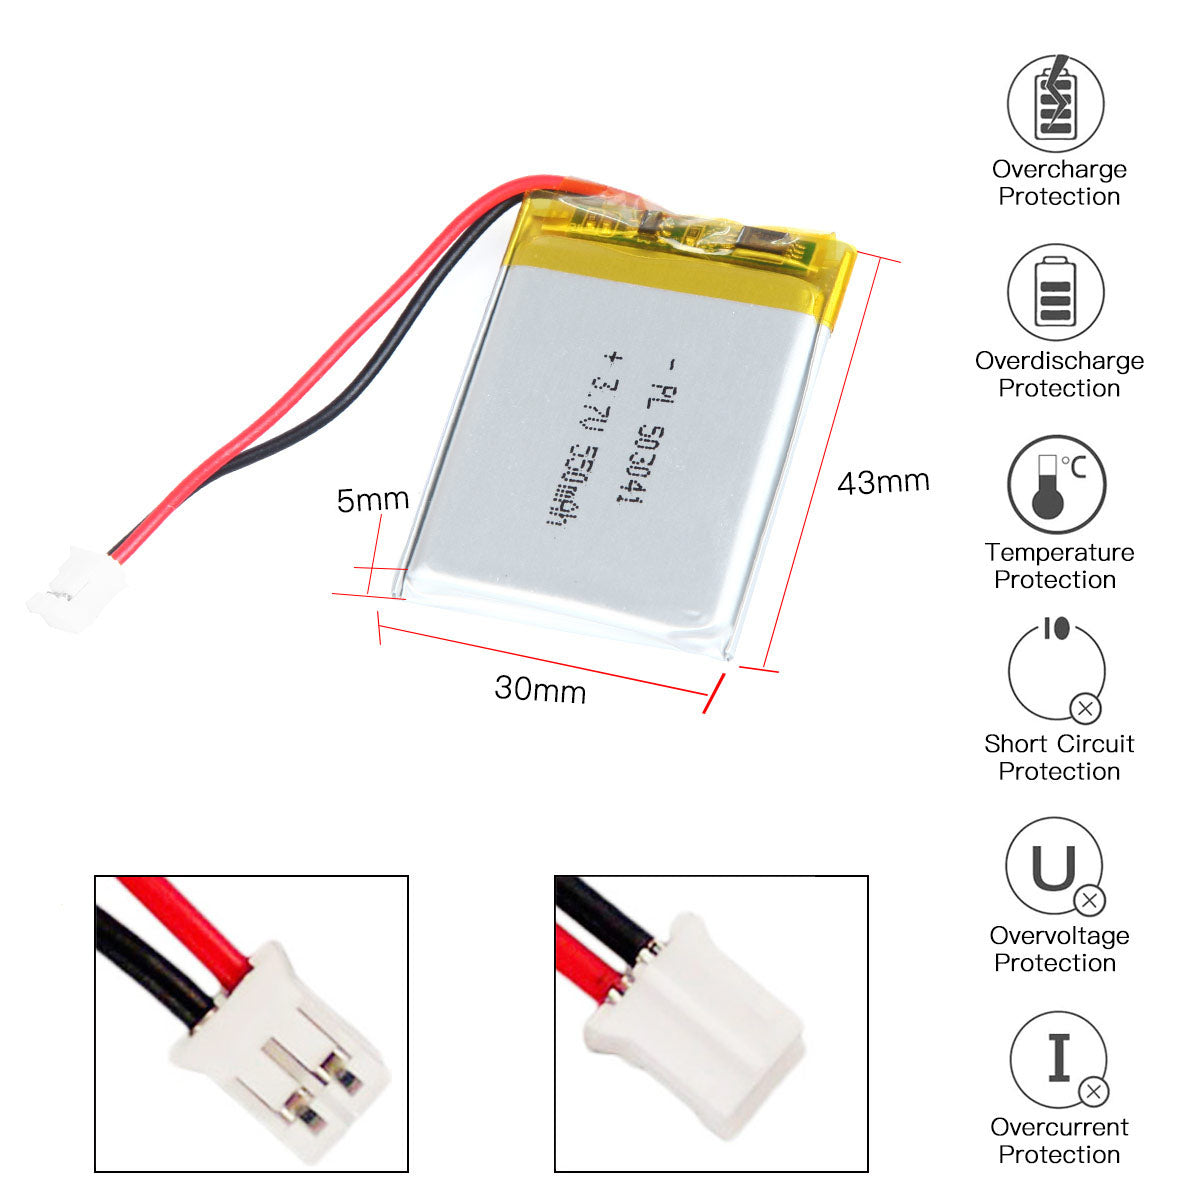 YDL 3.7V 550mAh 503041 Rechargeable Lithium Polymer Battery Length 43mm